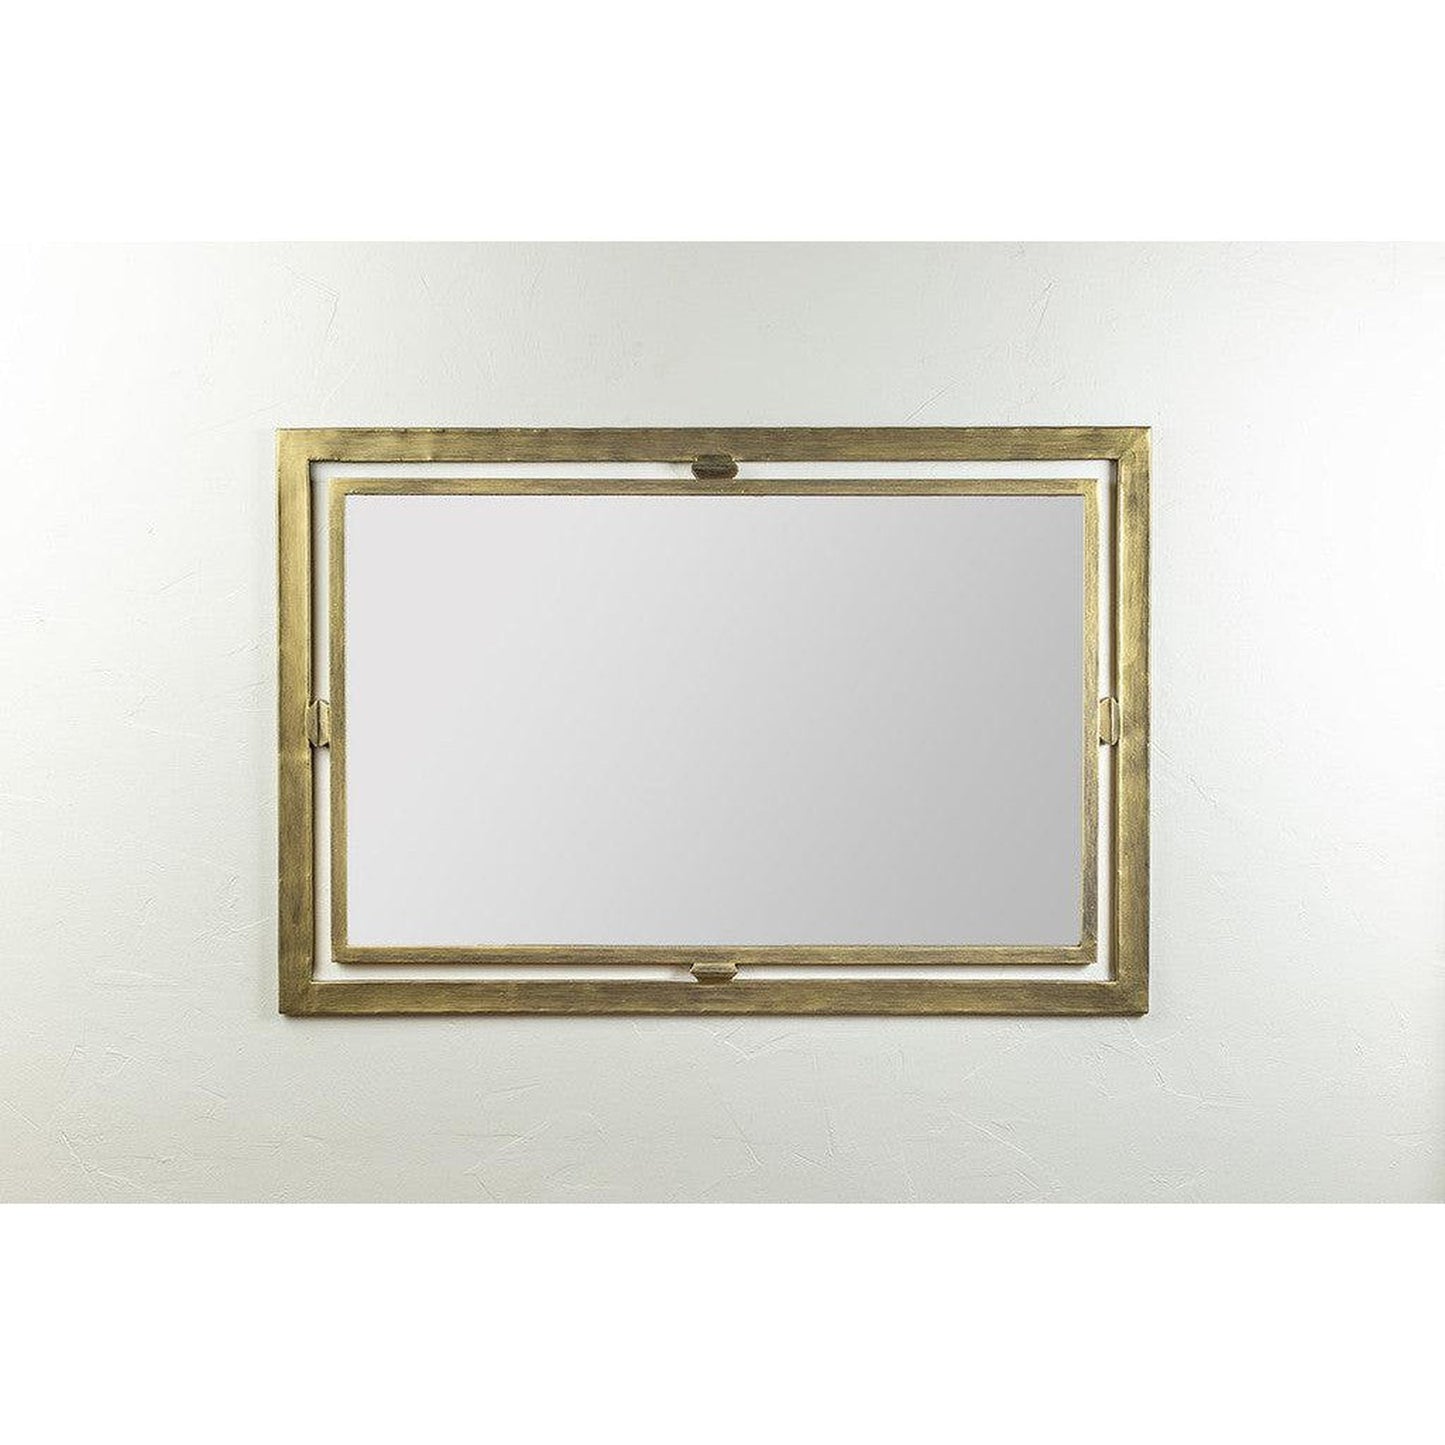 Stone County Ironworks Forest Hill 25" x 29" Small Burnished Gold Iron Wall Mirror